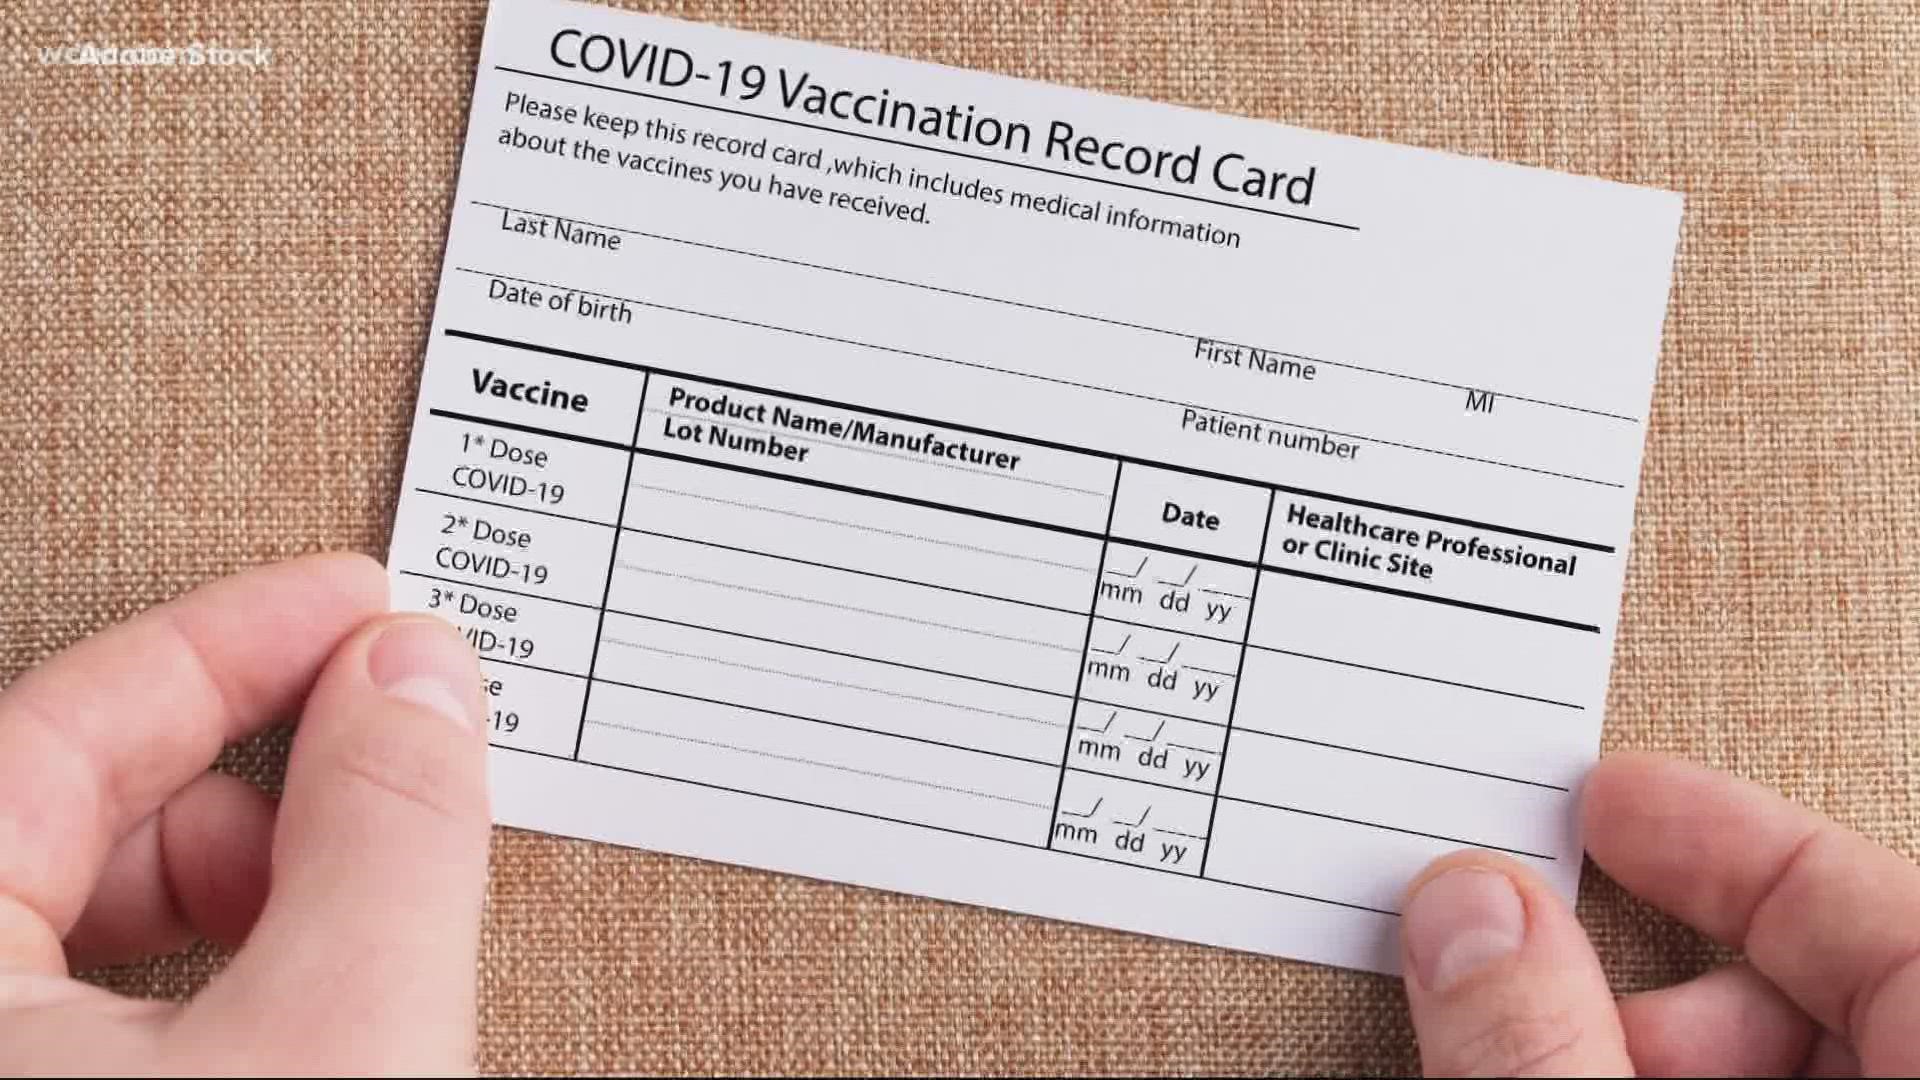 What happens if you forge a CDC card or buy a fake one?